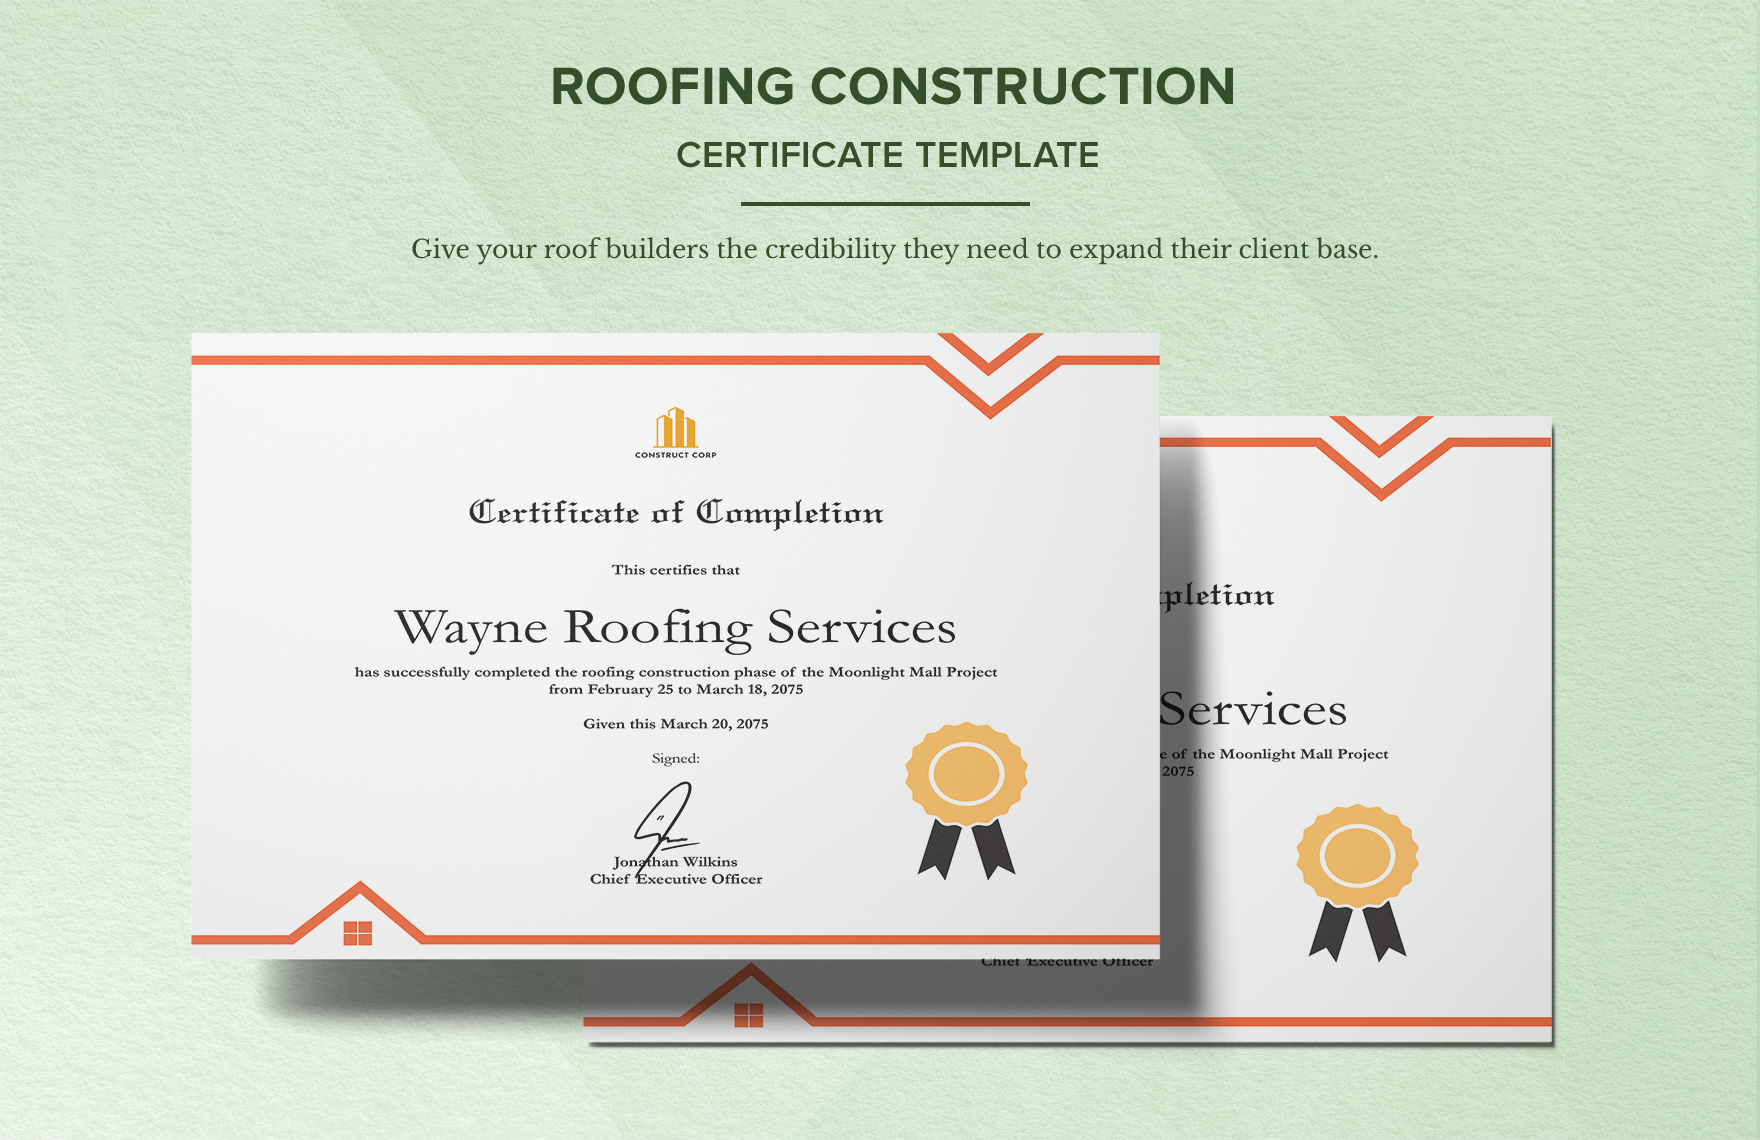 Roofing Construction Certificate Template in Word, PDF, Illustrator, PSD, SVG, PNG